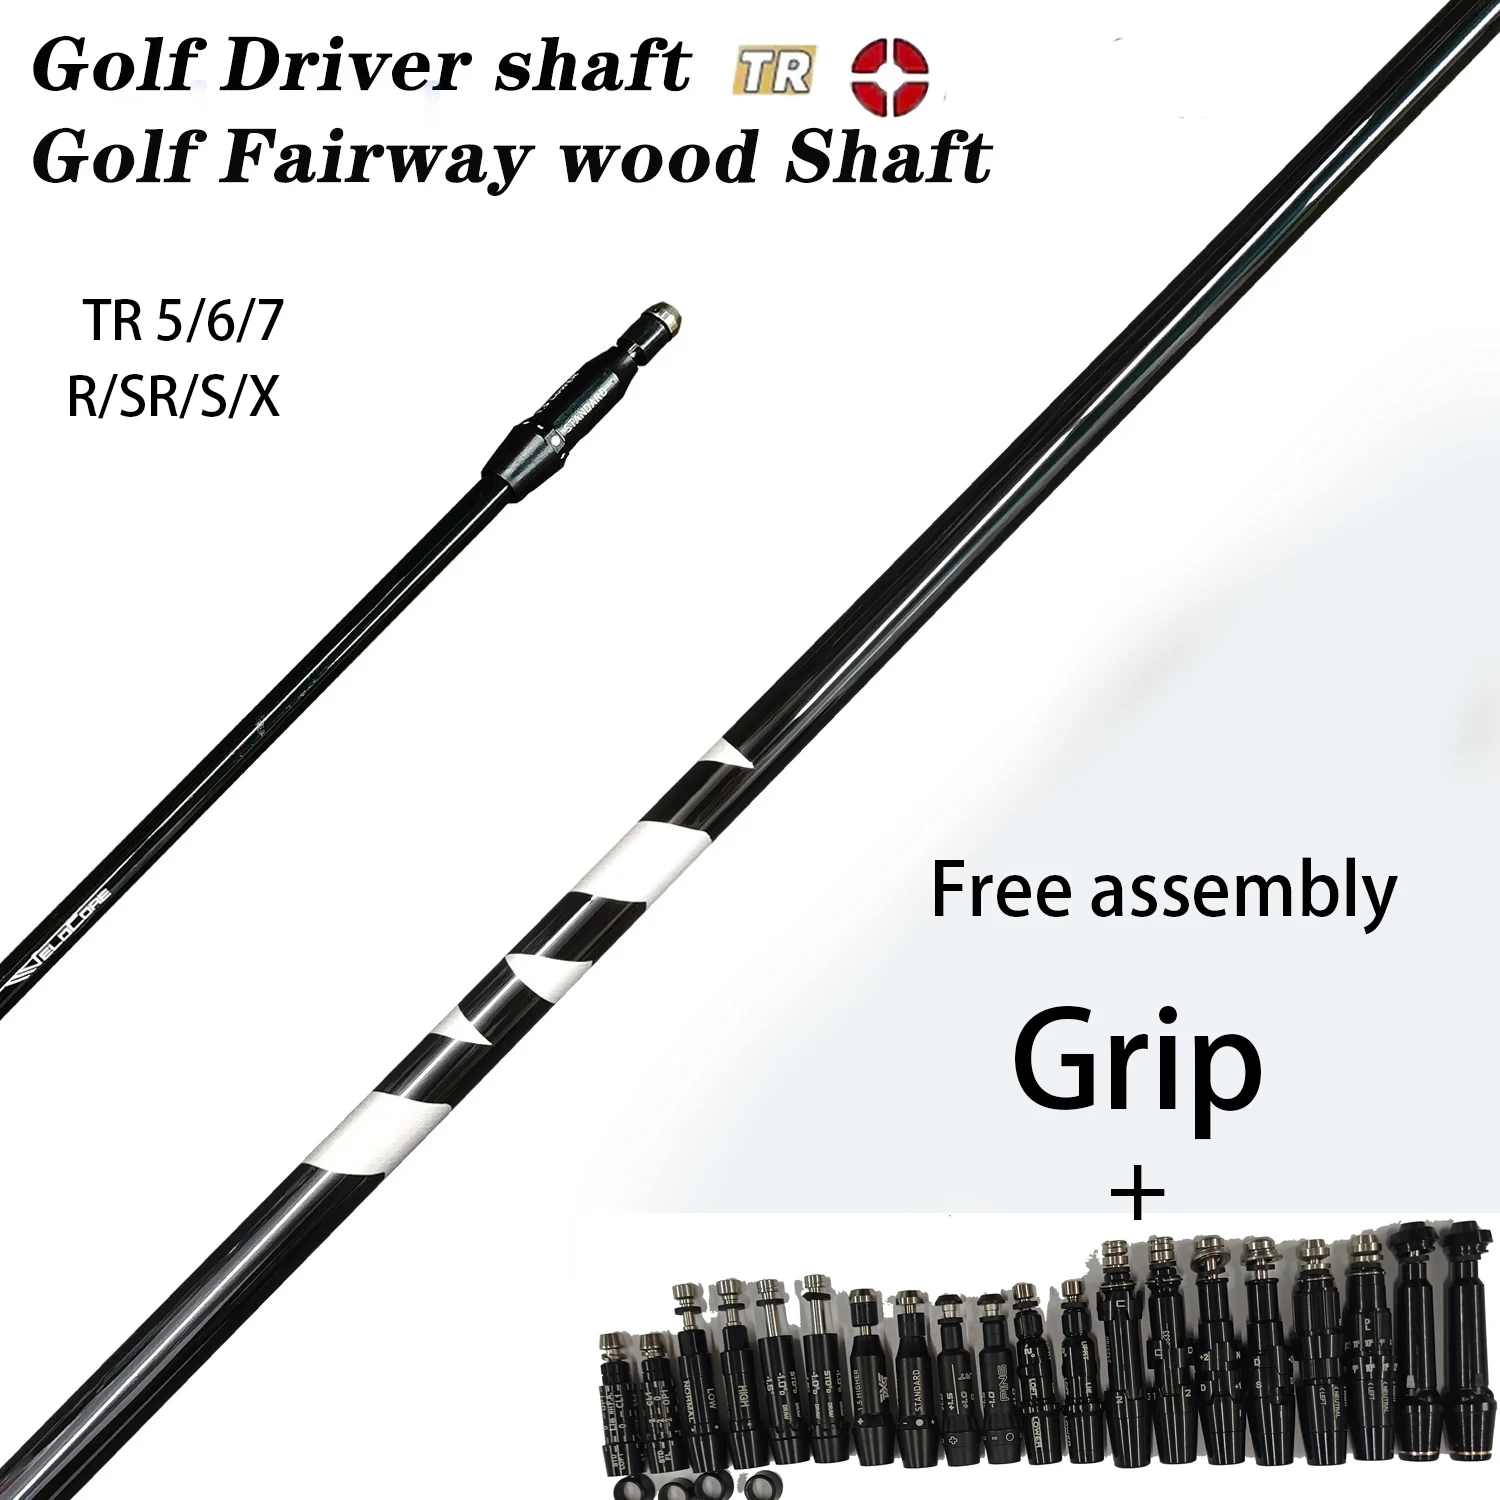 

New Golf Clubs Shaft FU JI VE US black 5/6 /R/SR/S/X Graphite Shaft Driver and wood Shafts Free assembly sleeve and grip